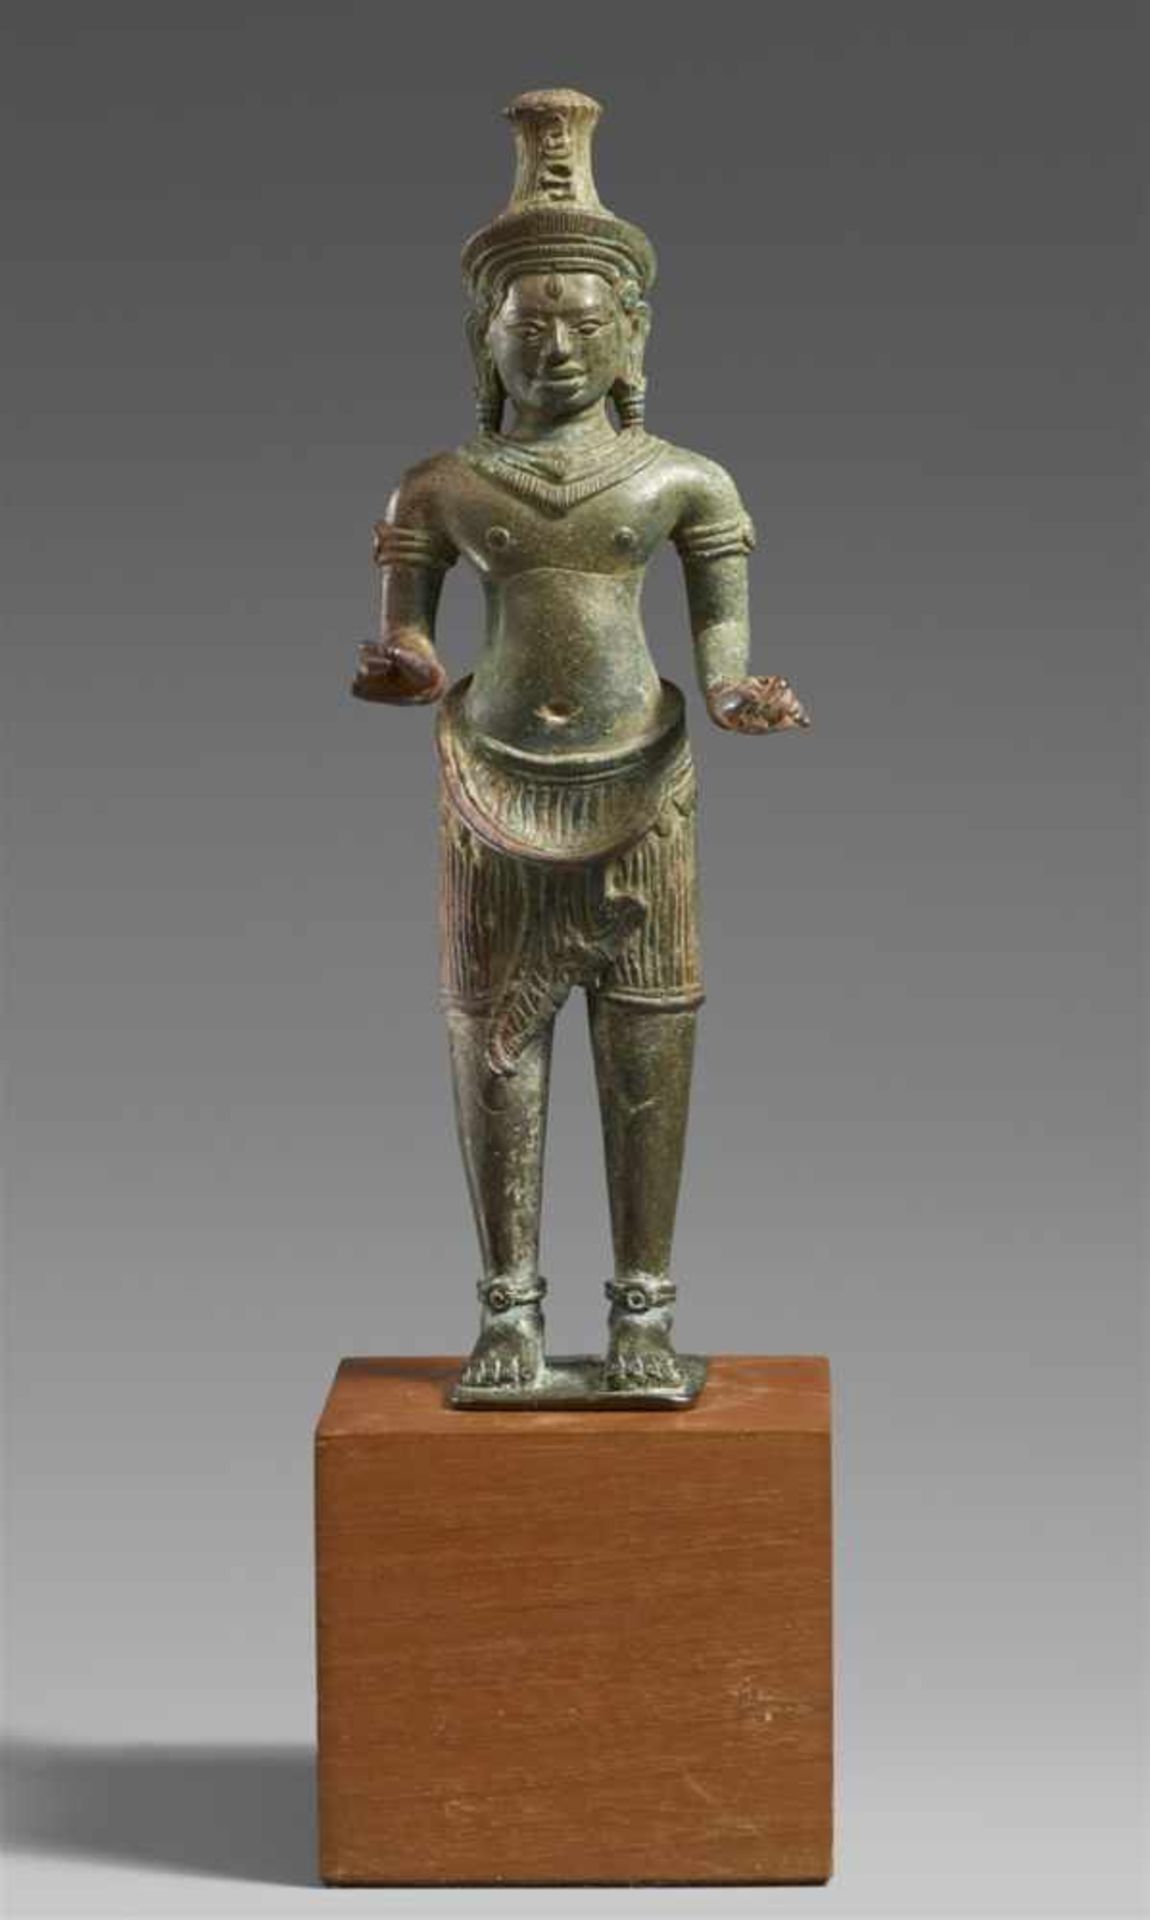 A Khmer bronze figure of a standing Shiva. Cambodia. Bayon style. 13th century